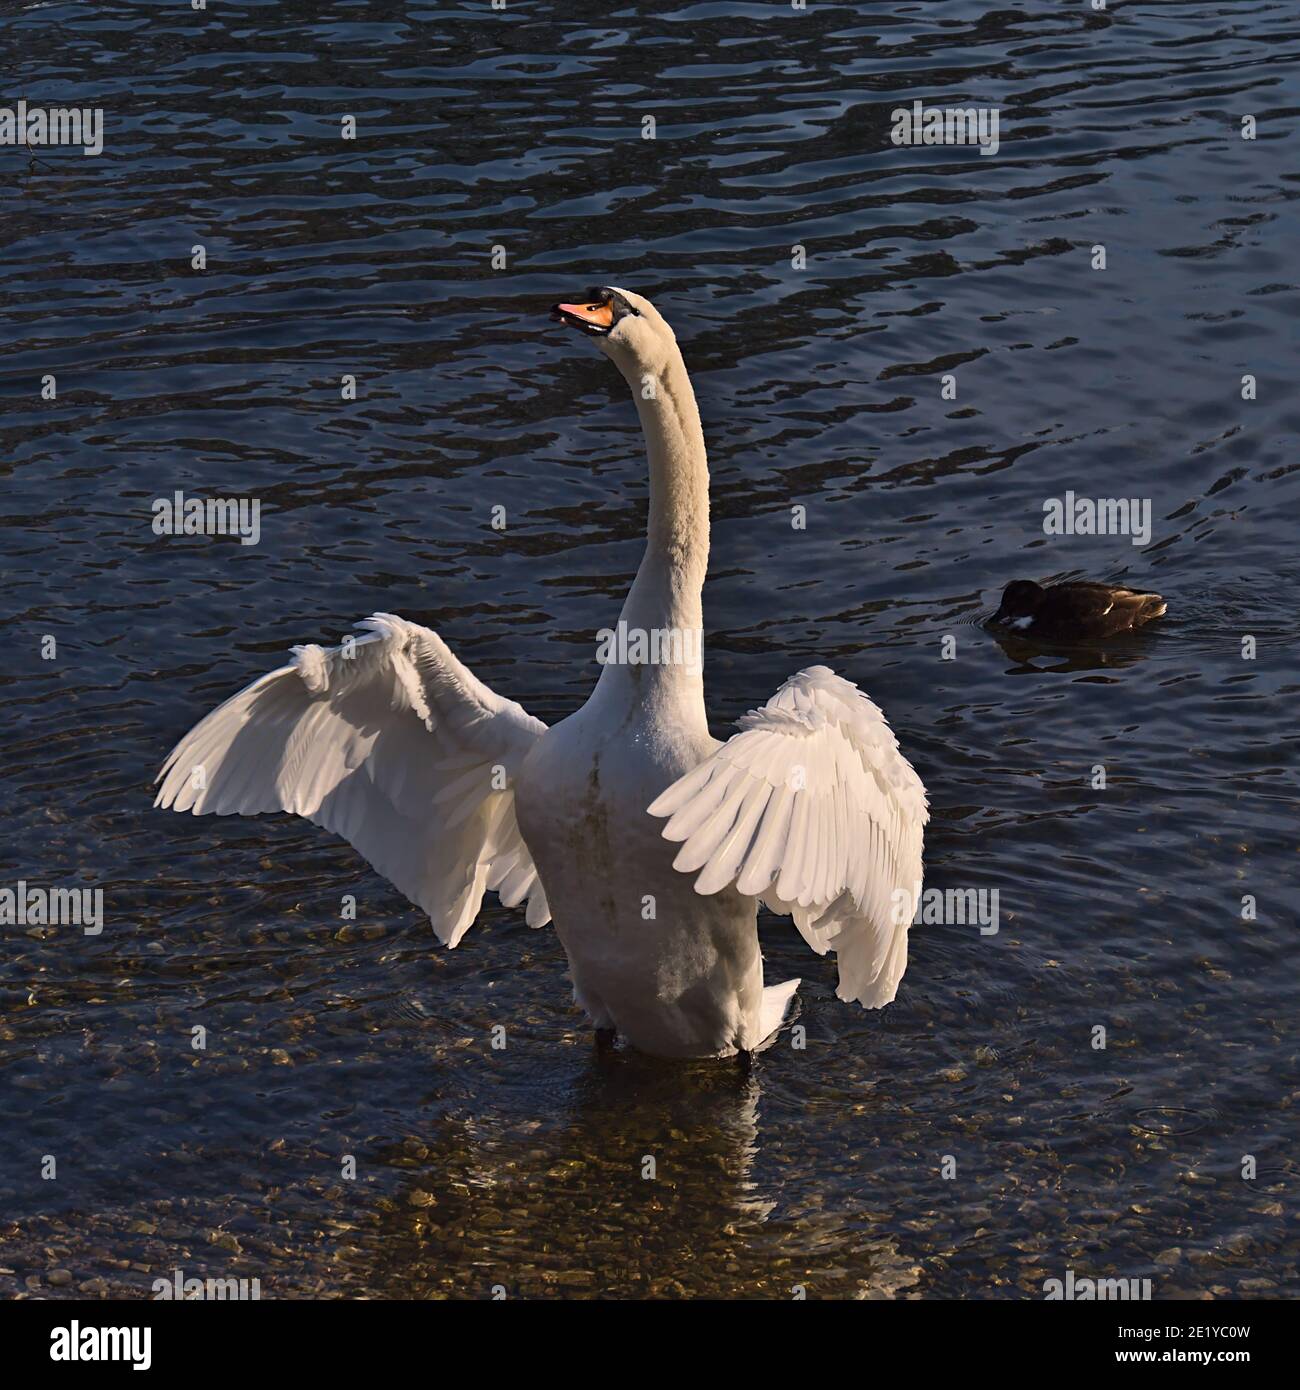 Closeup view of graceful mute swan (cygnus olor) with white plumage and orange beak standing tall with spread wings at the shore of Danube River. Stock Photo